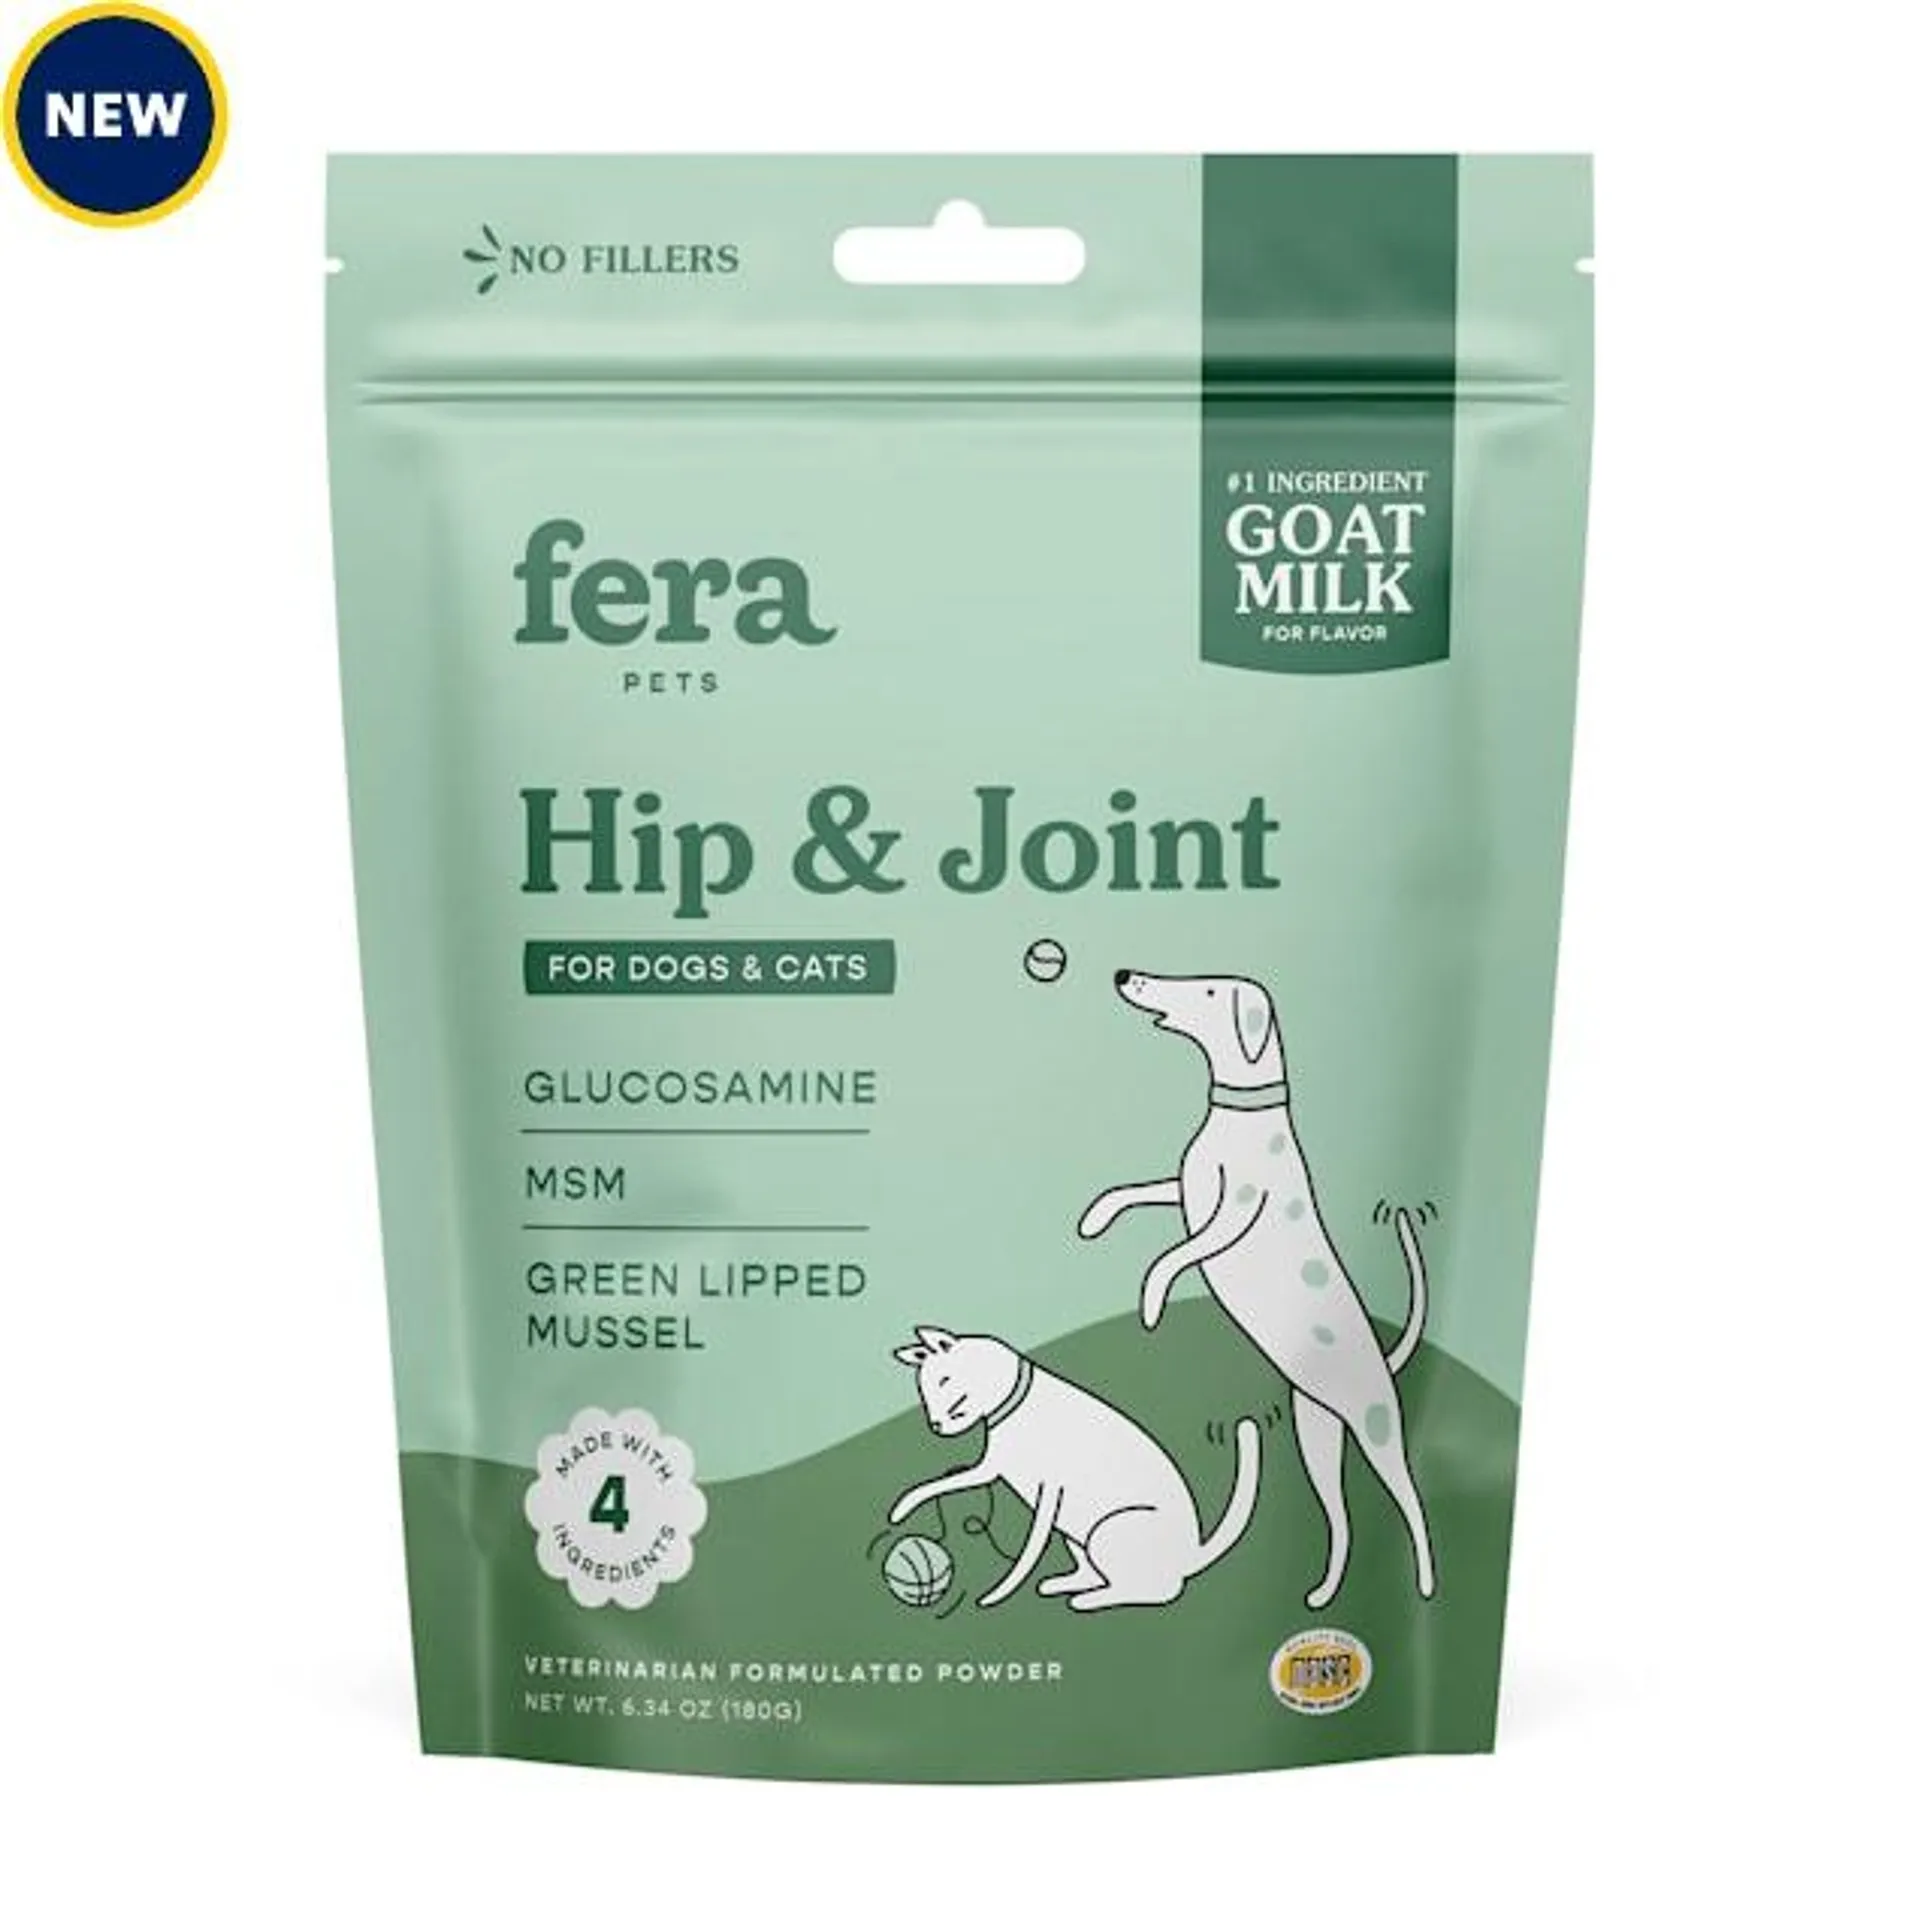 Fera Pet Organics Goat Milk Meal Topper - Hip & Joint Support for Dogs & Cats, 6.34 oz.